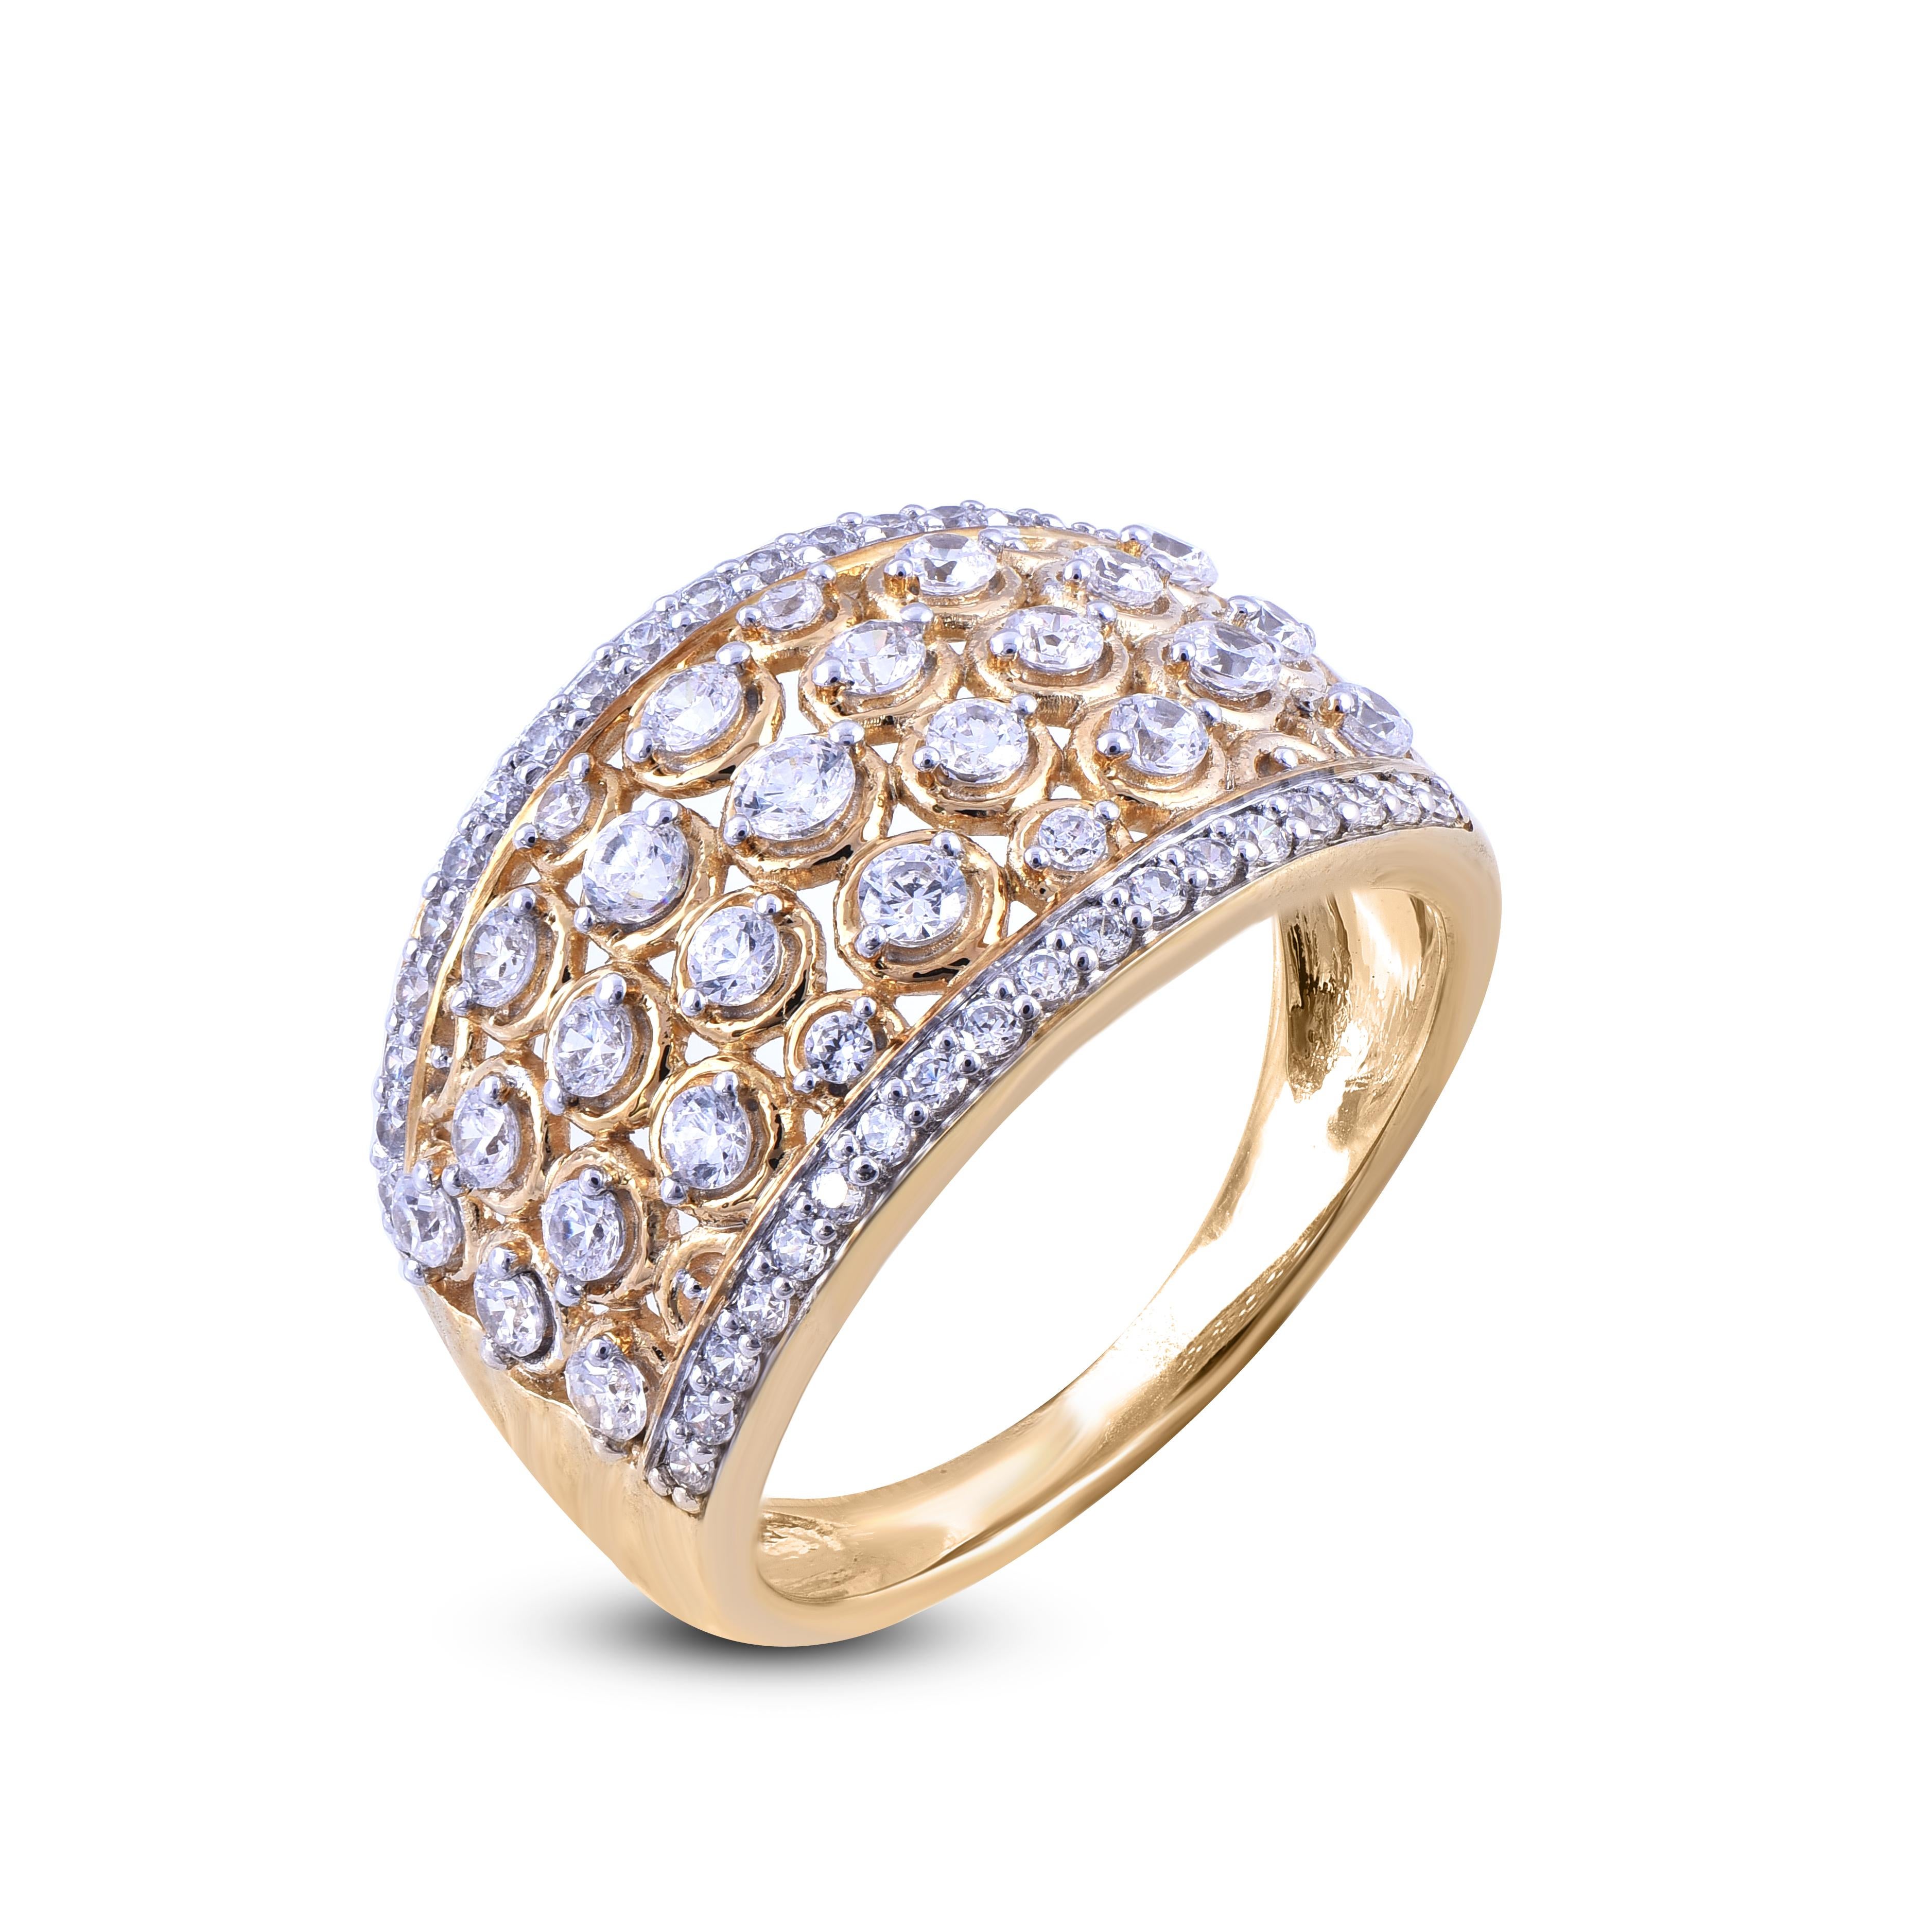 Beautiful Round Natural Diamond ring in 14 karat yellow gold. This ring is beautifully designed and features 63 round diamond set in pressure and prong setting. We only use 100% natural and conflict free diamond which shines in H-I Color and I2